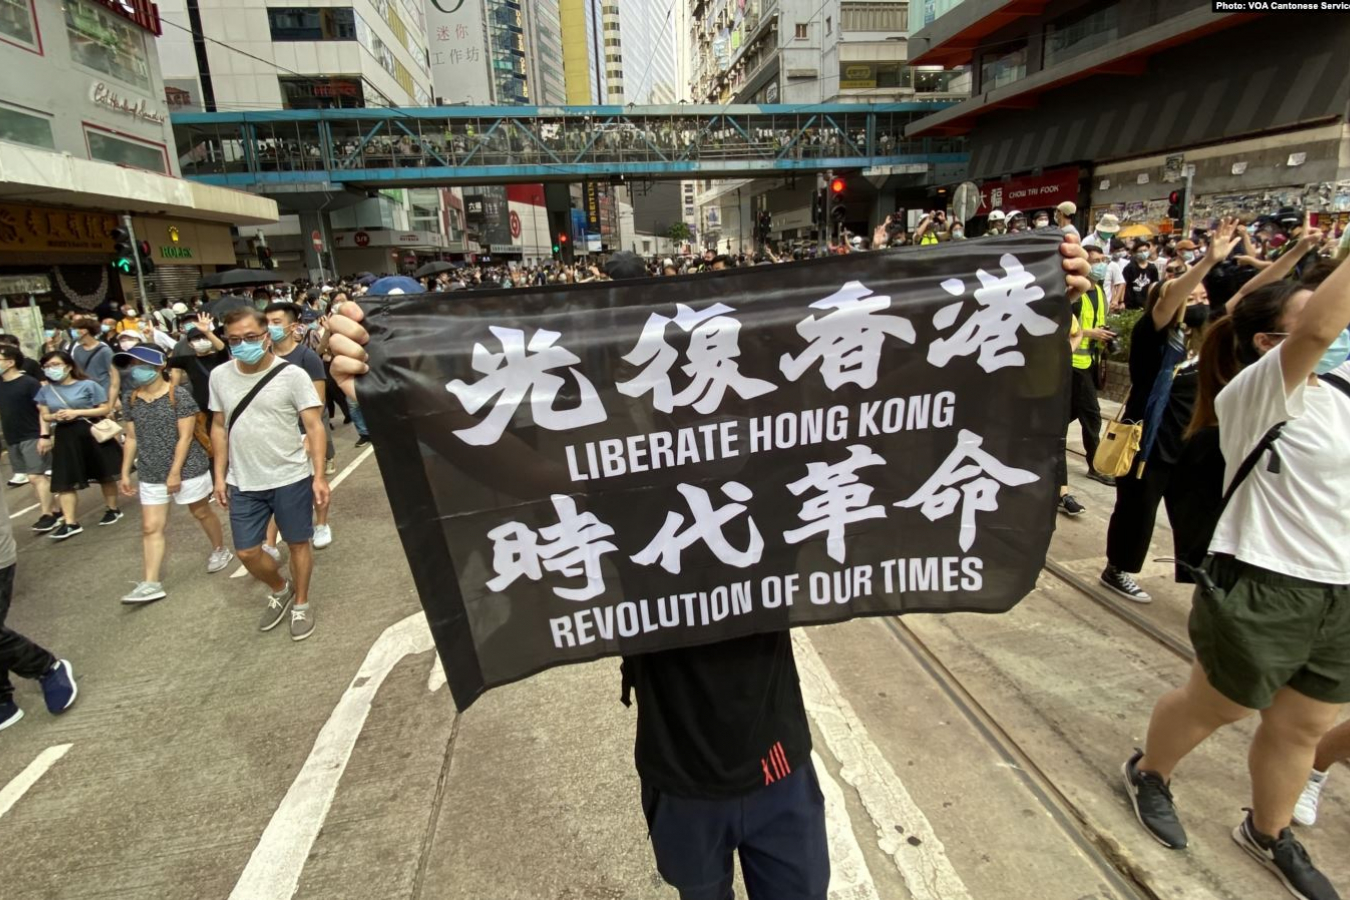 On July 1st, the first day of the implementation of the National Security Law, tens of thousands of Hong Kong people marched.